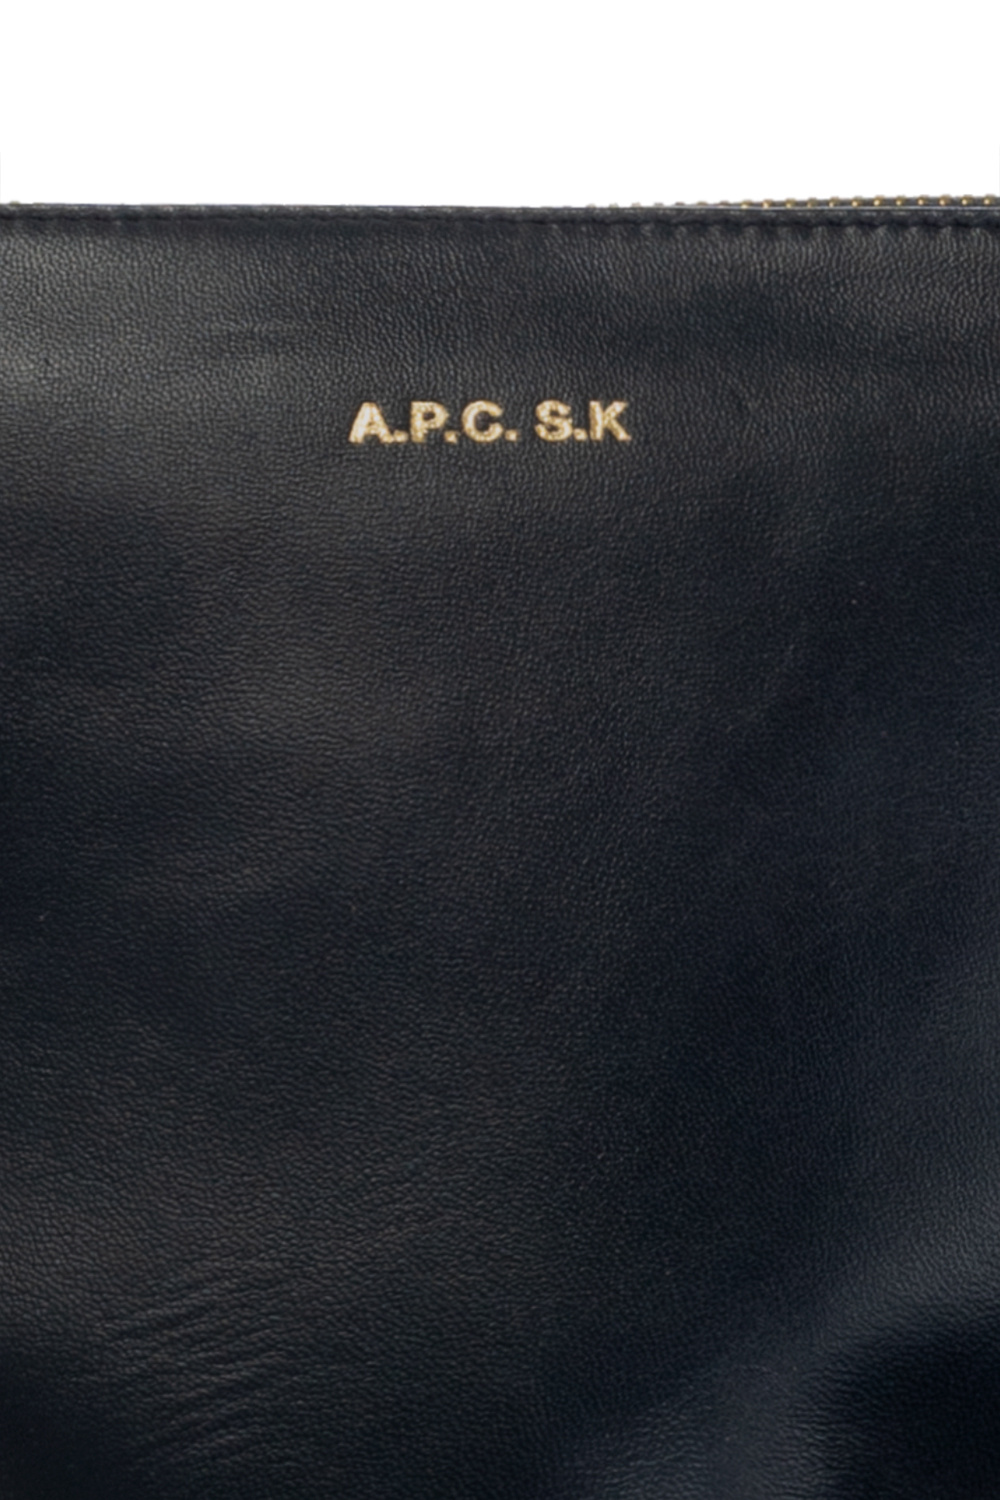 A.P.C. A.P.C. x Suzanne Koller